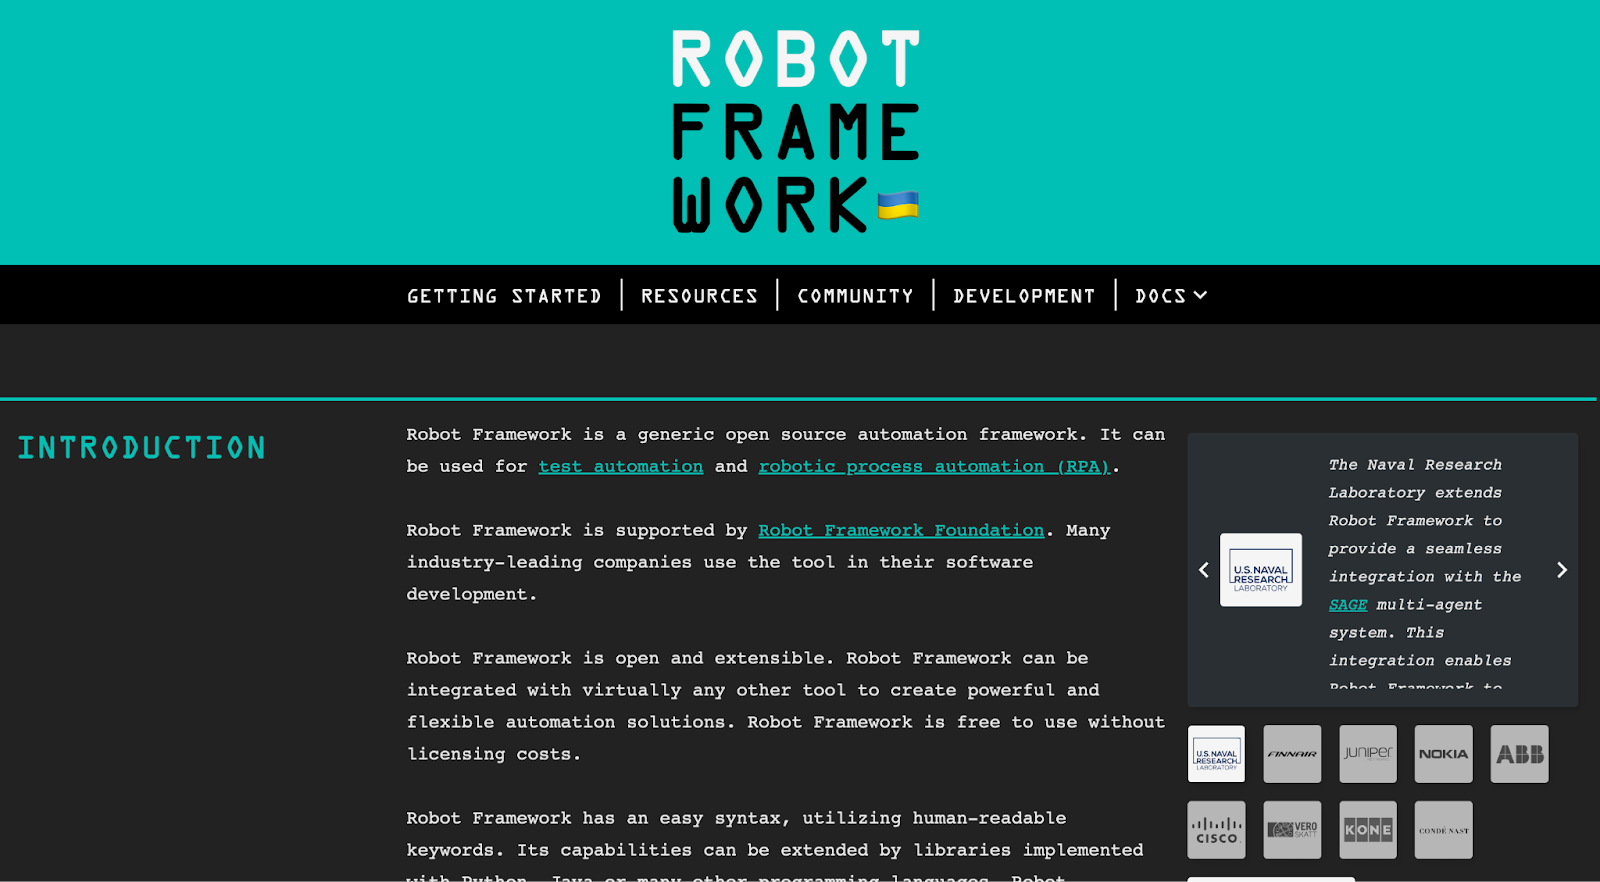 Robot framework- Tool for Automating Test Scripts